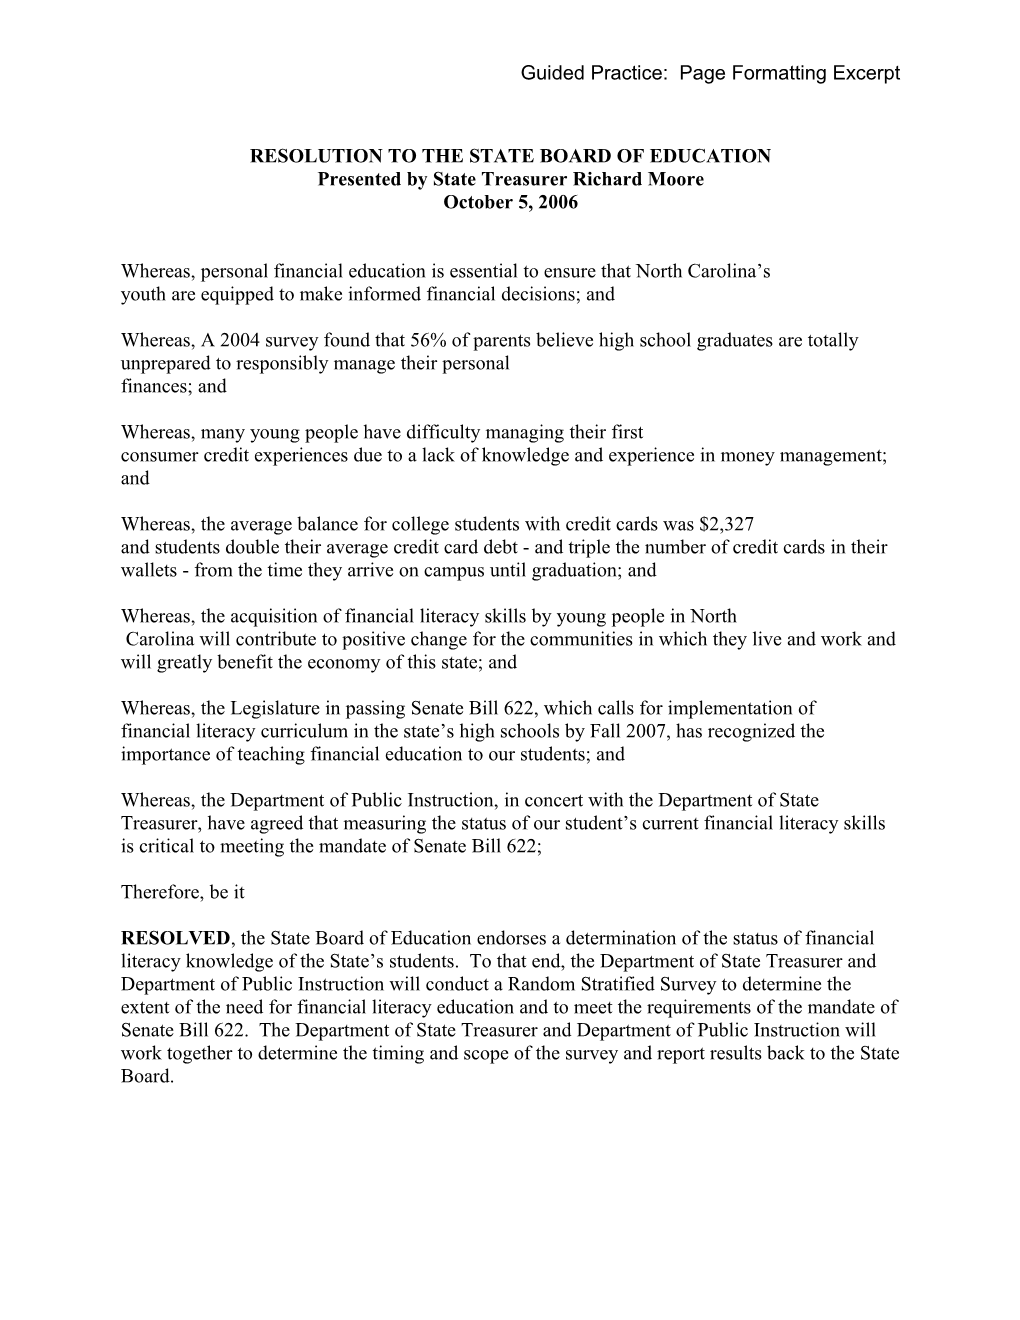 Resolution to the State Board of Education